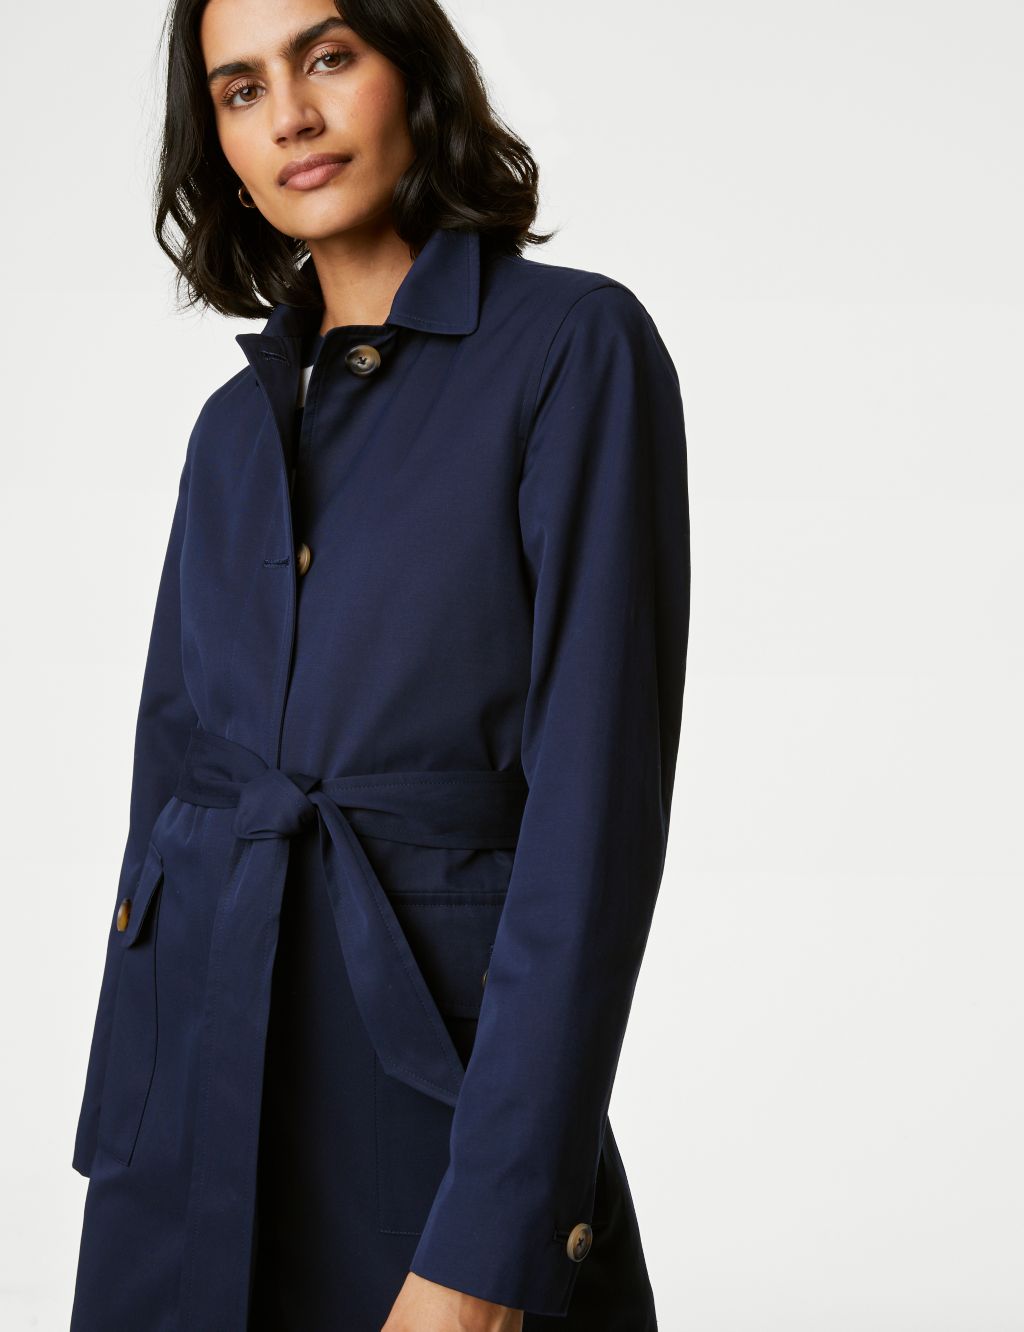 Cotton Blend Belted Trench Coat image 3